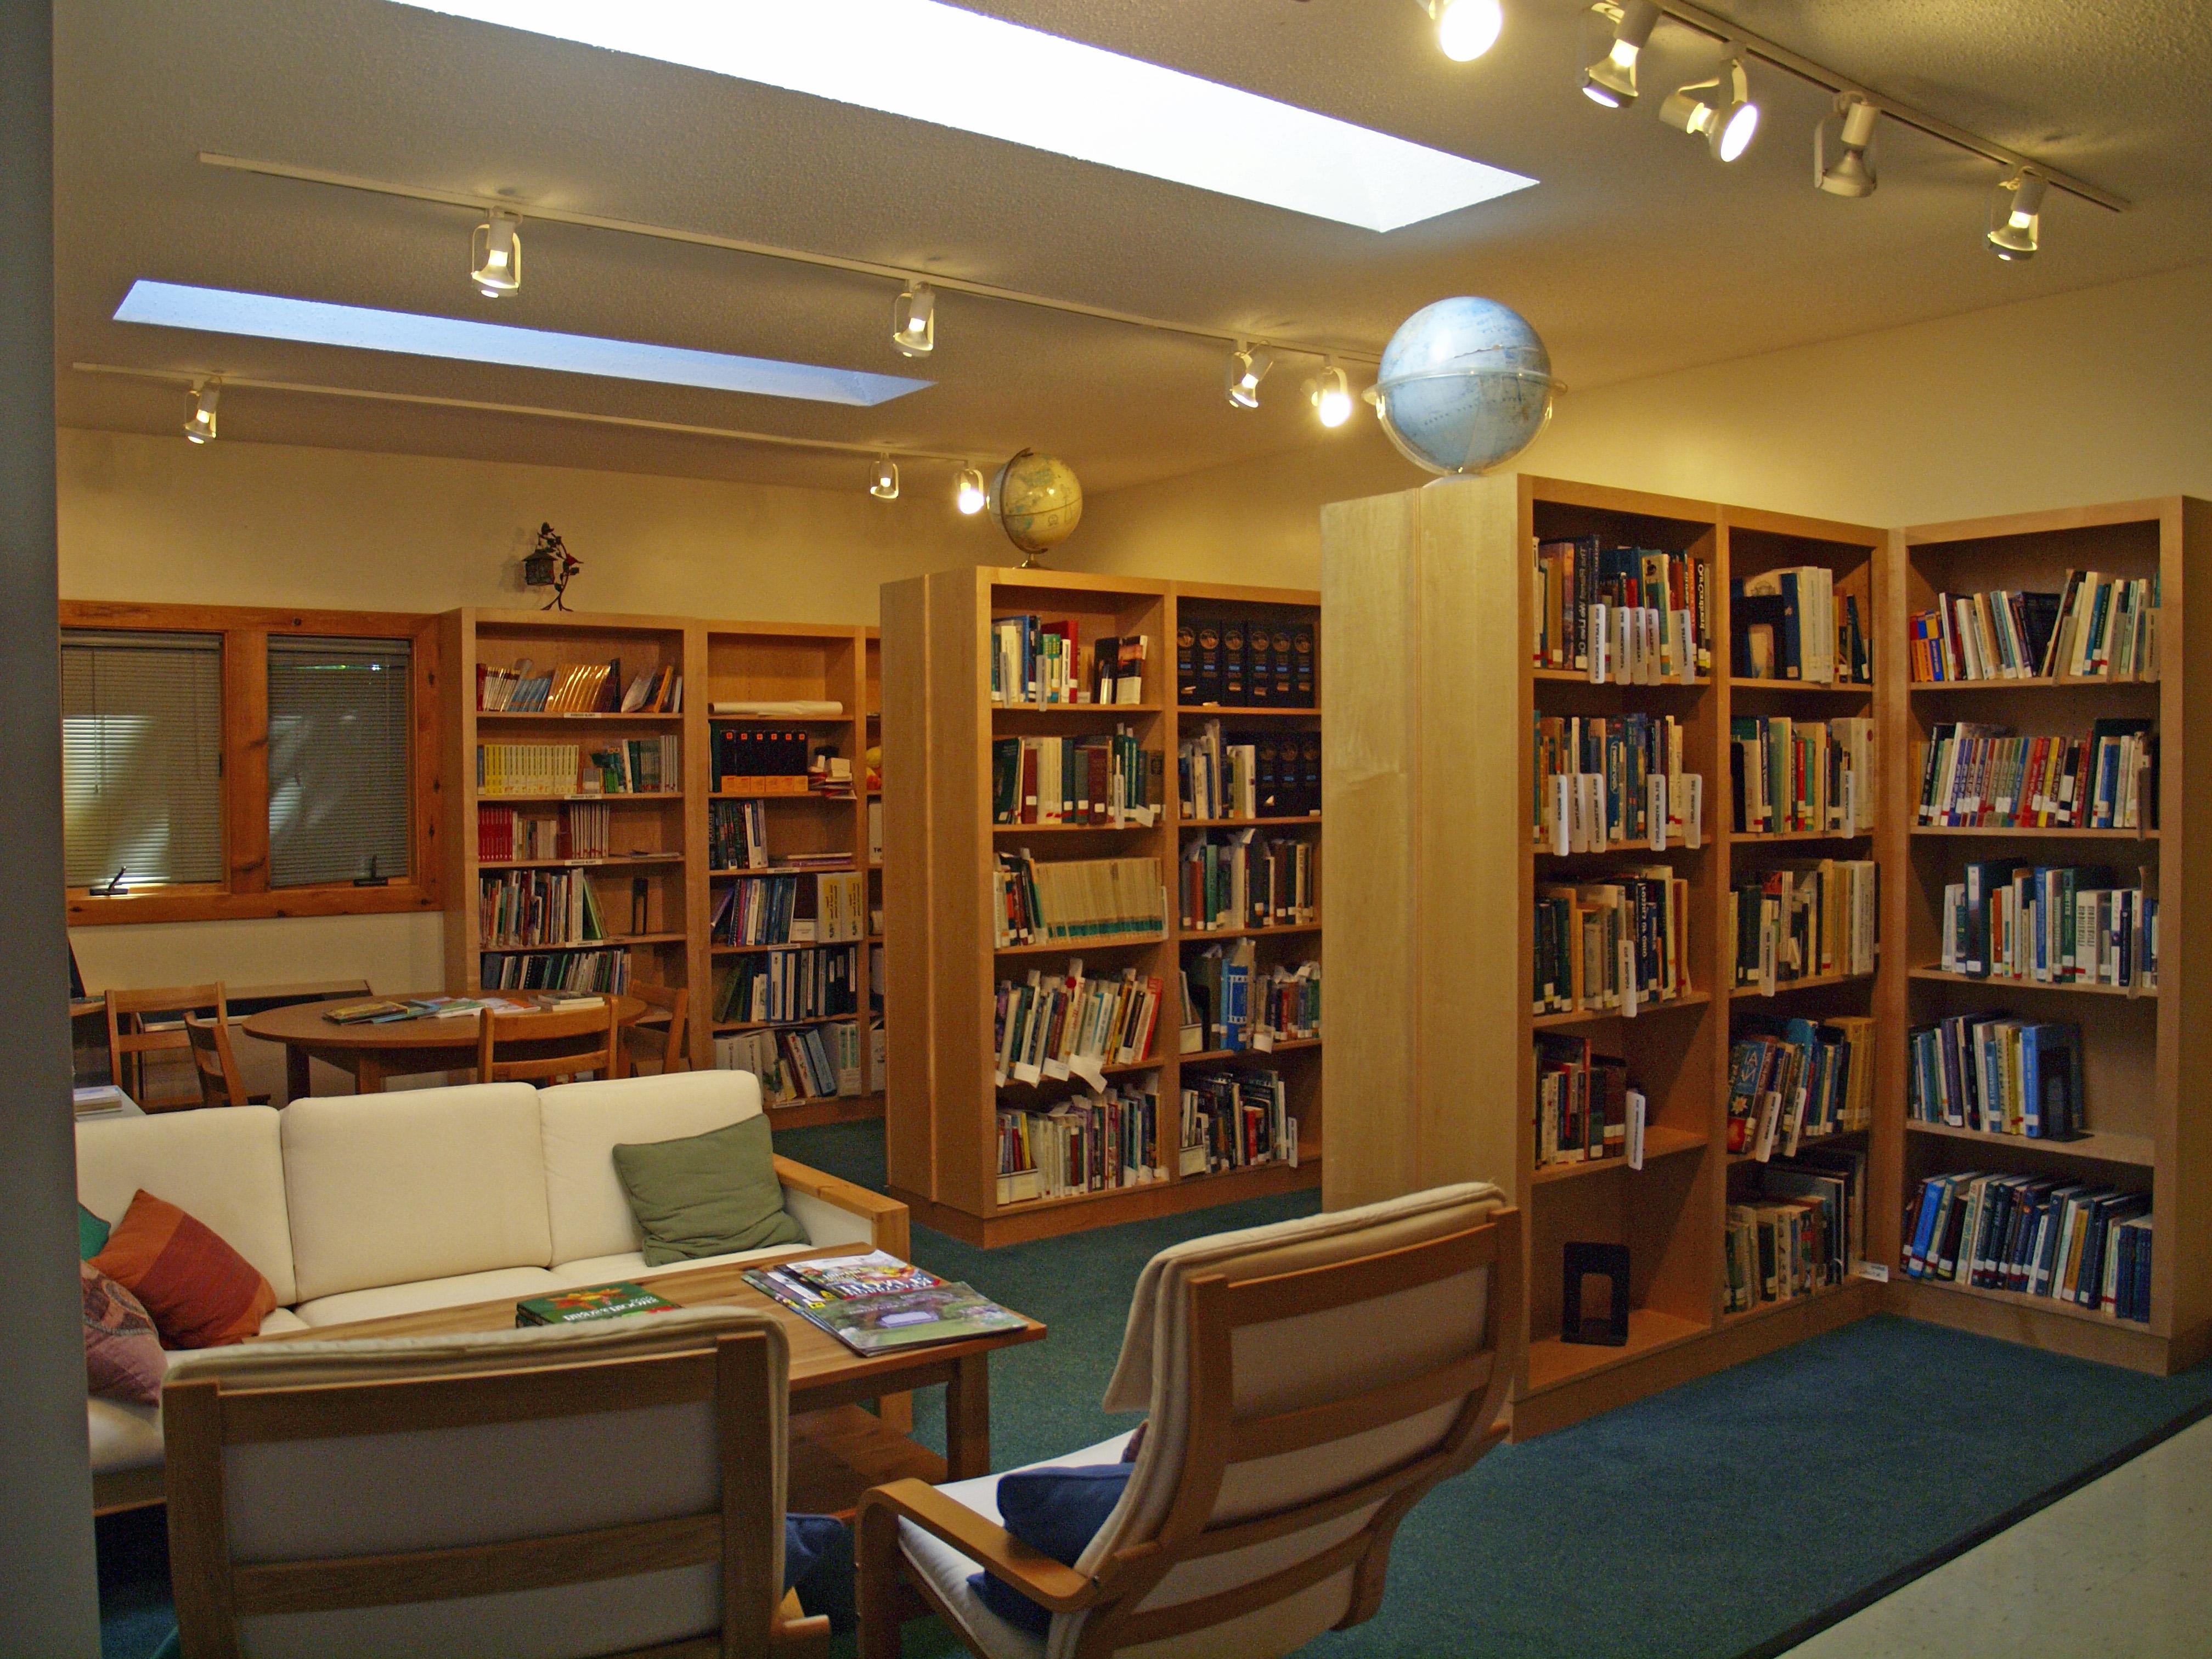 A study space with bookshelves 和 couches located in the 自然中心